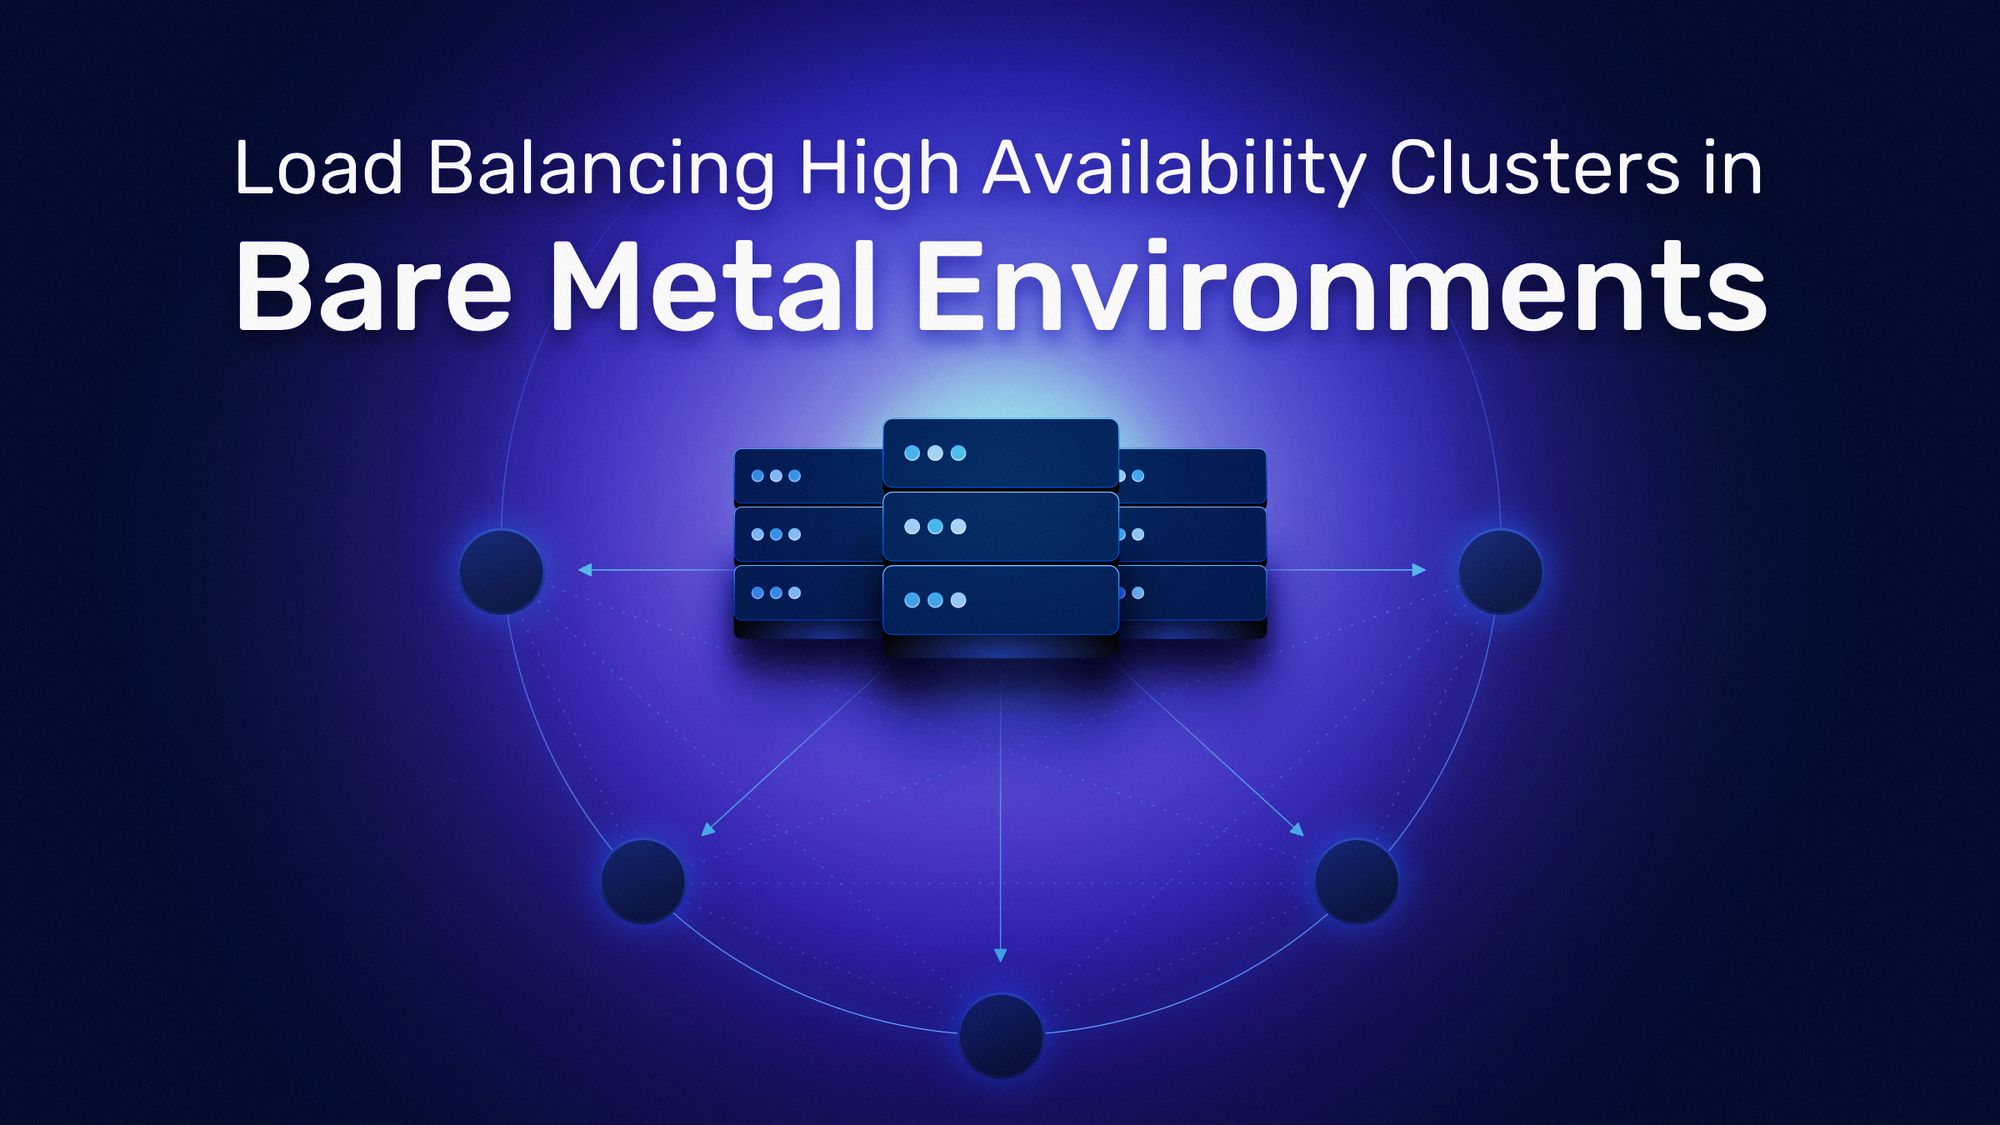 load balancing high availability clusters in bare metal environments